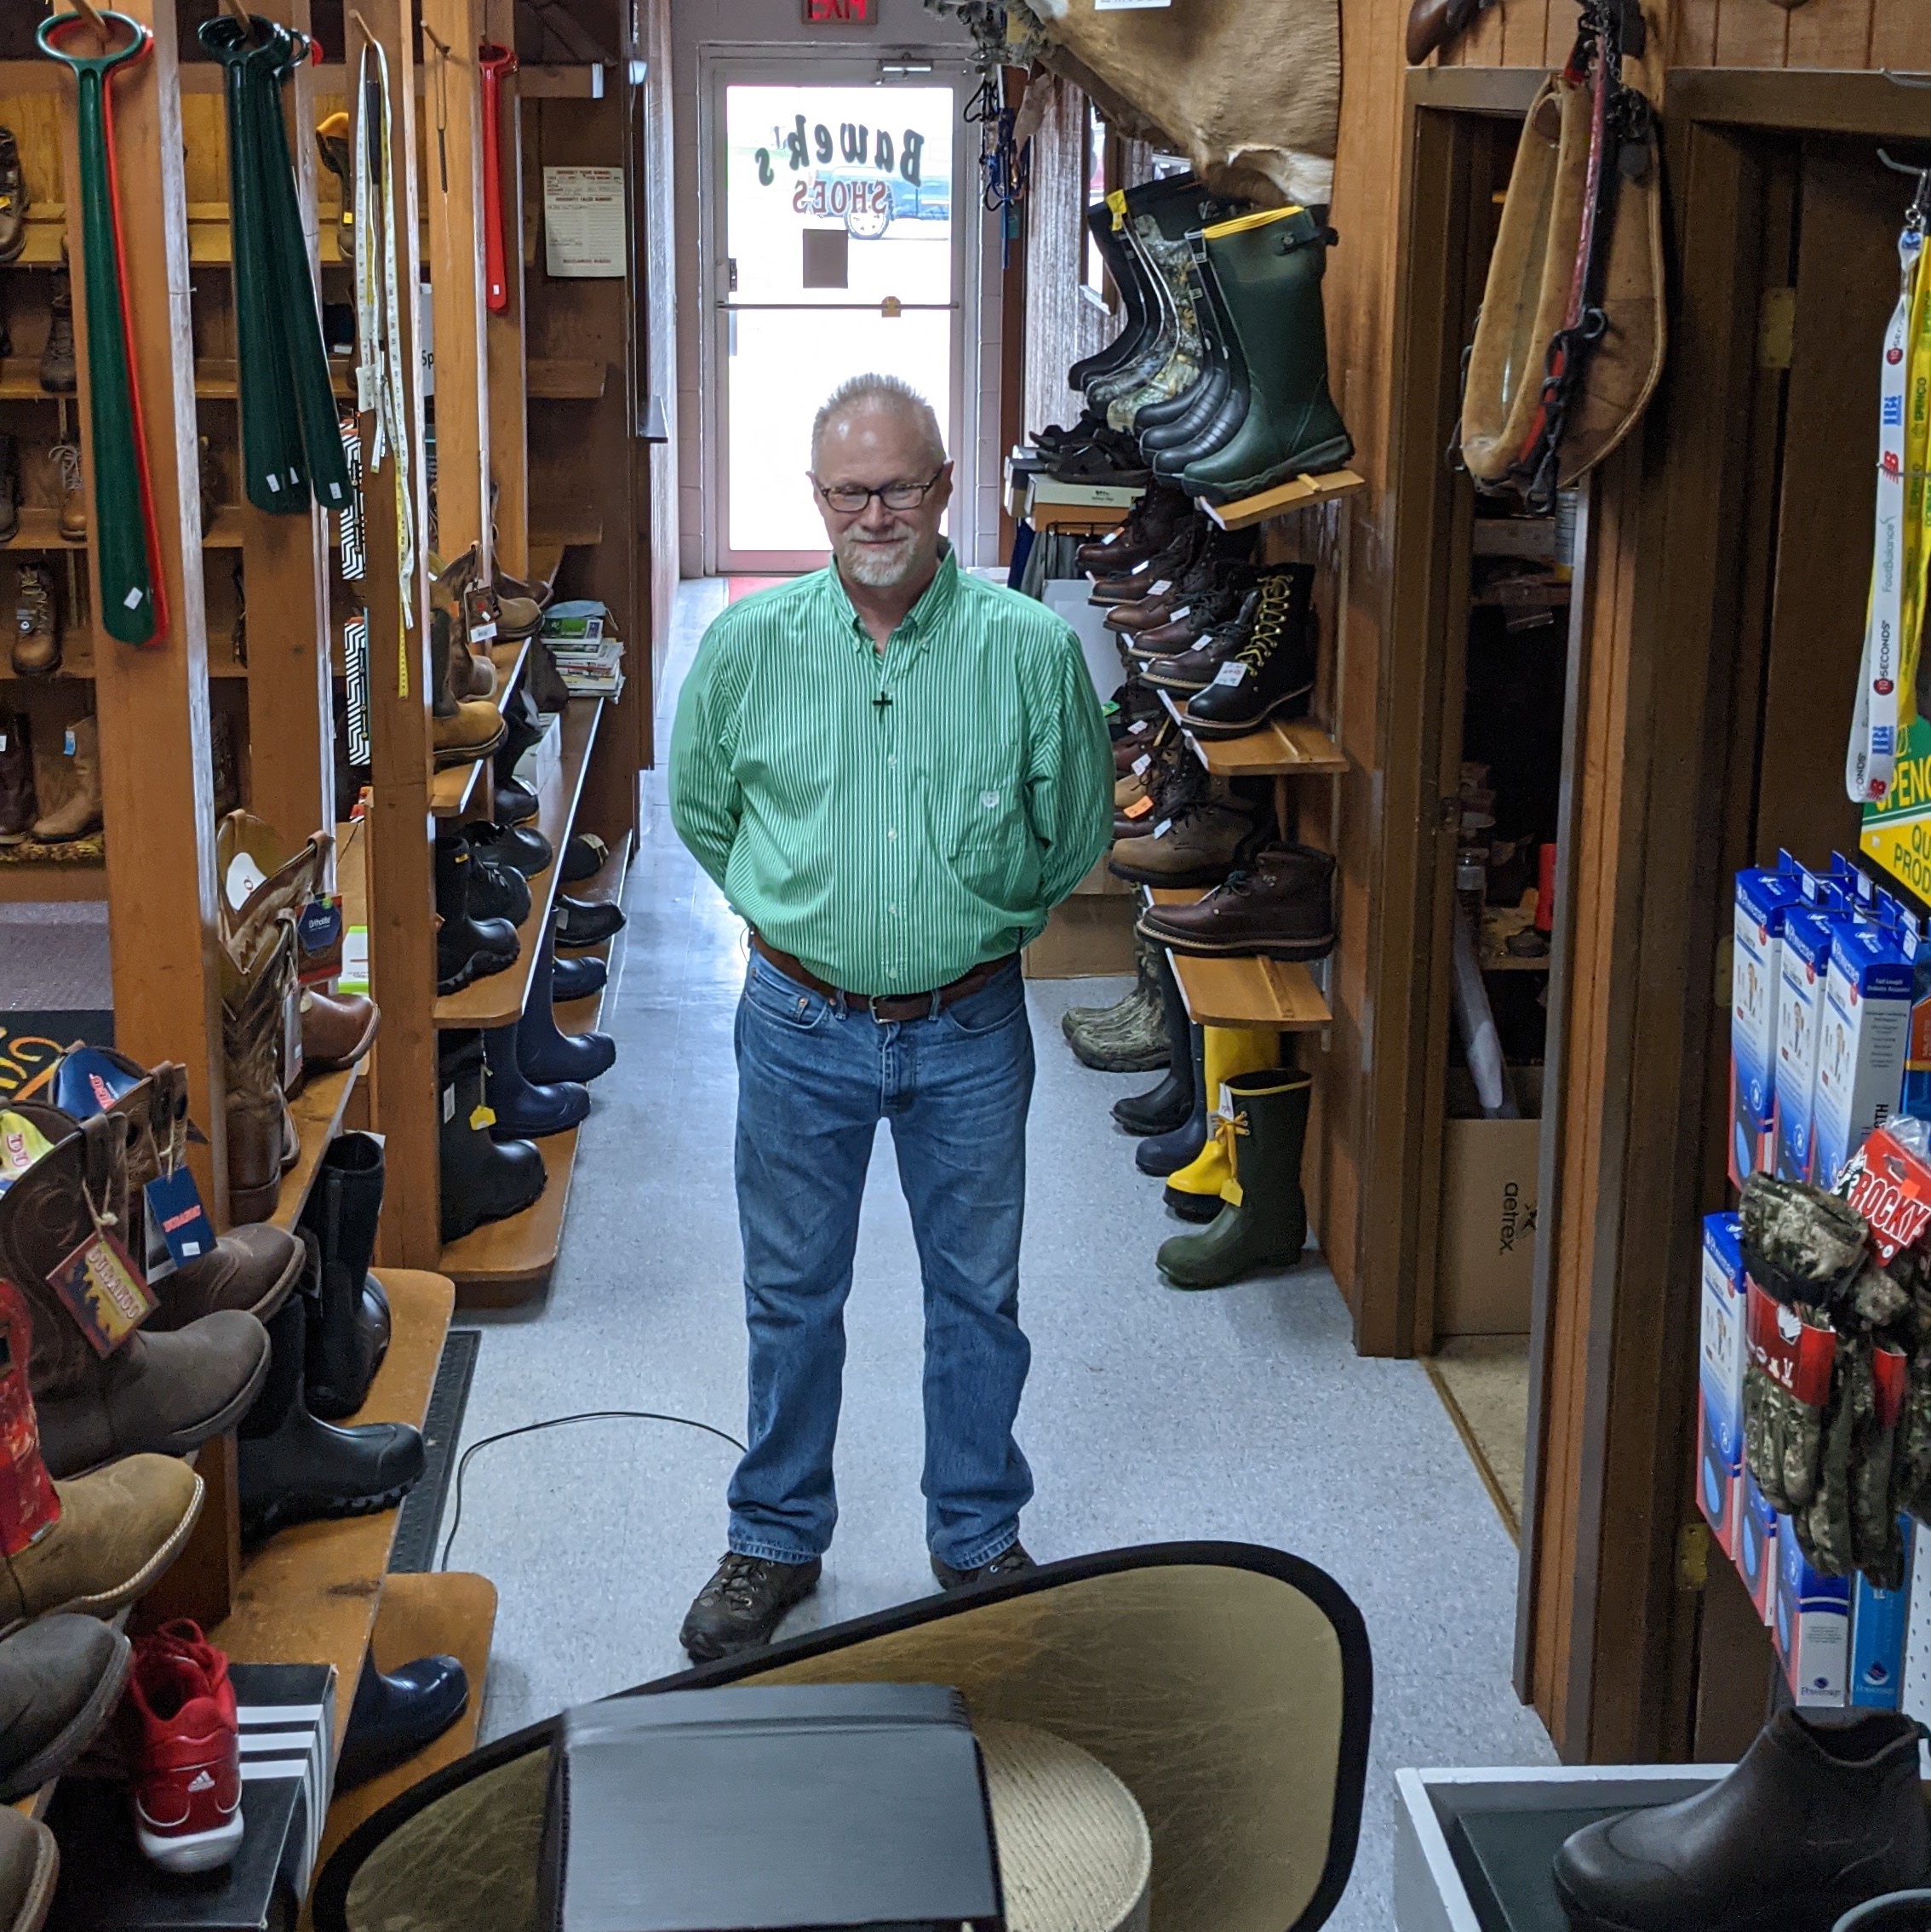 Craig Bawek of Bawek's Shoes stands within his store.